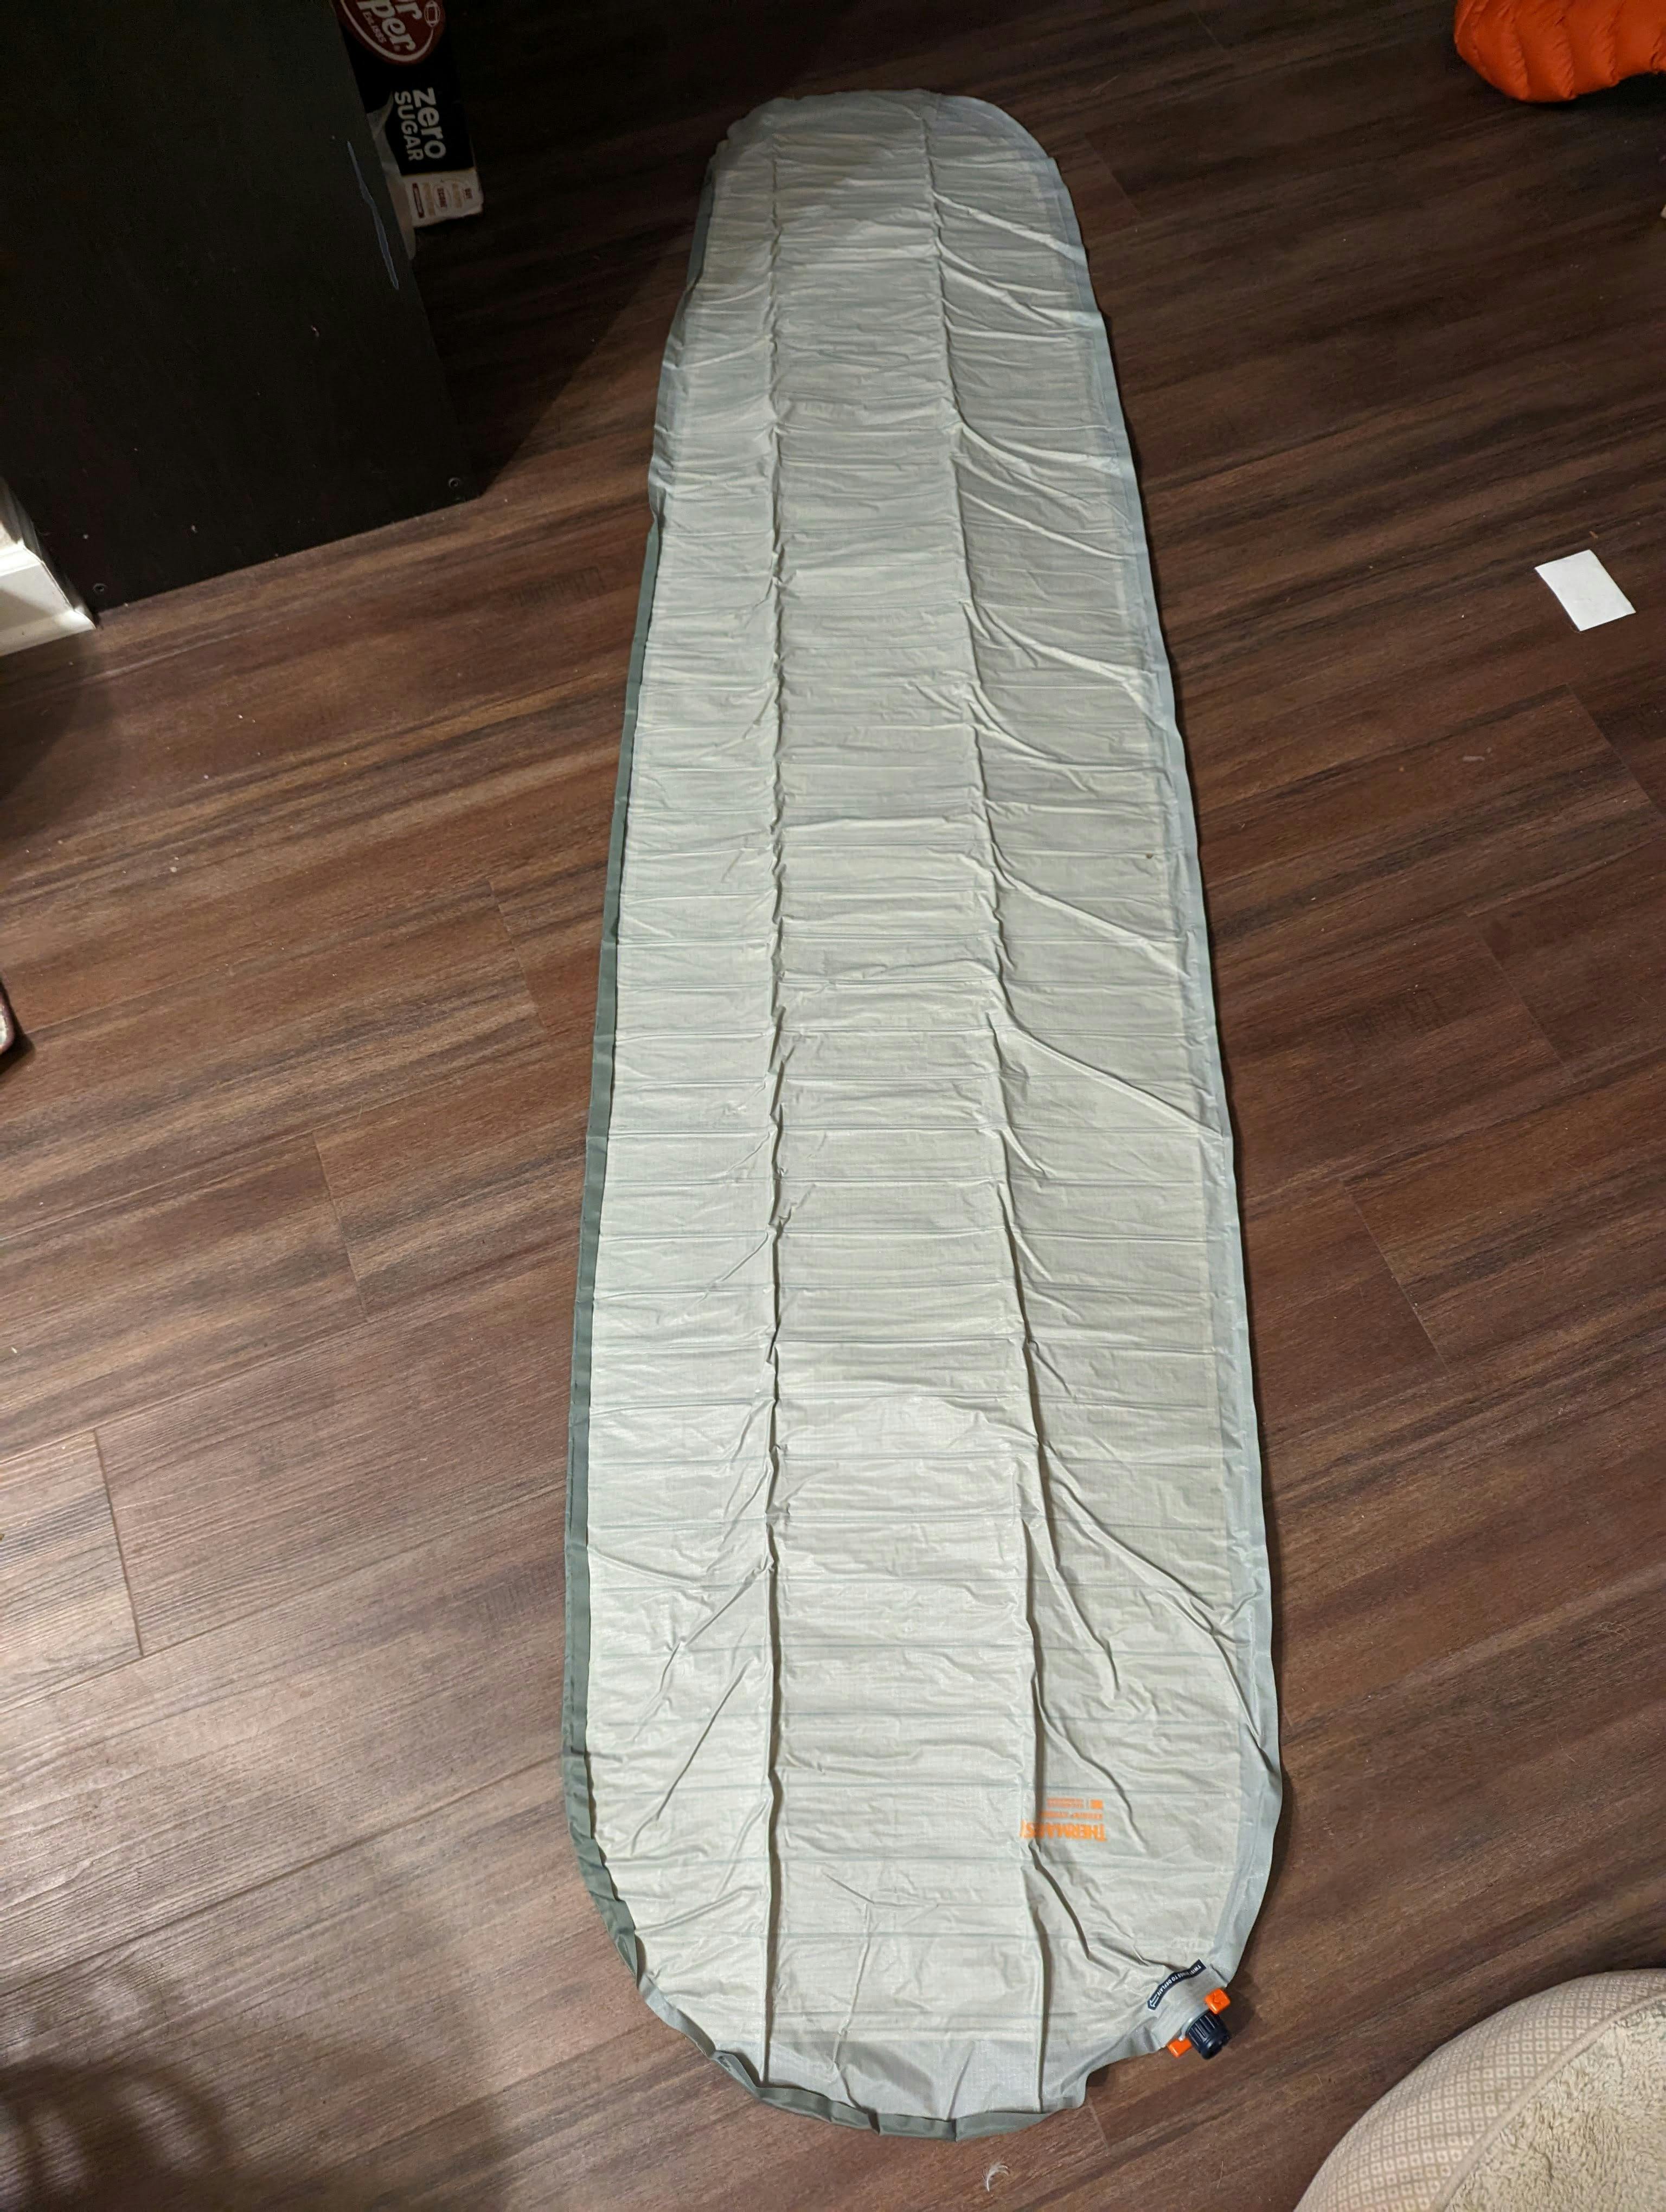 Top of the Therm-a-Rest NeoAir XTherm MAX Sleeping Pad.